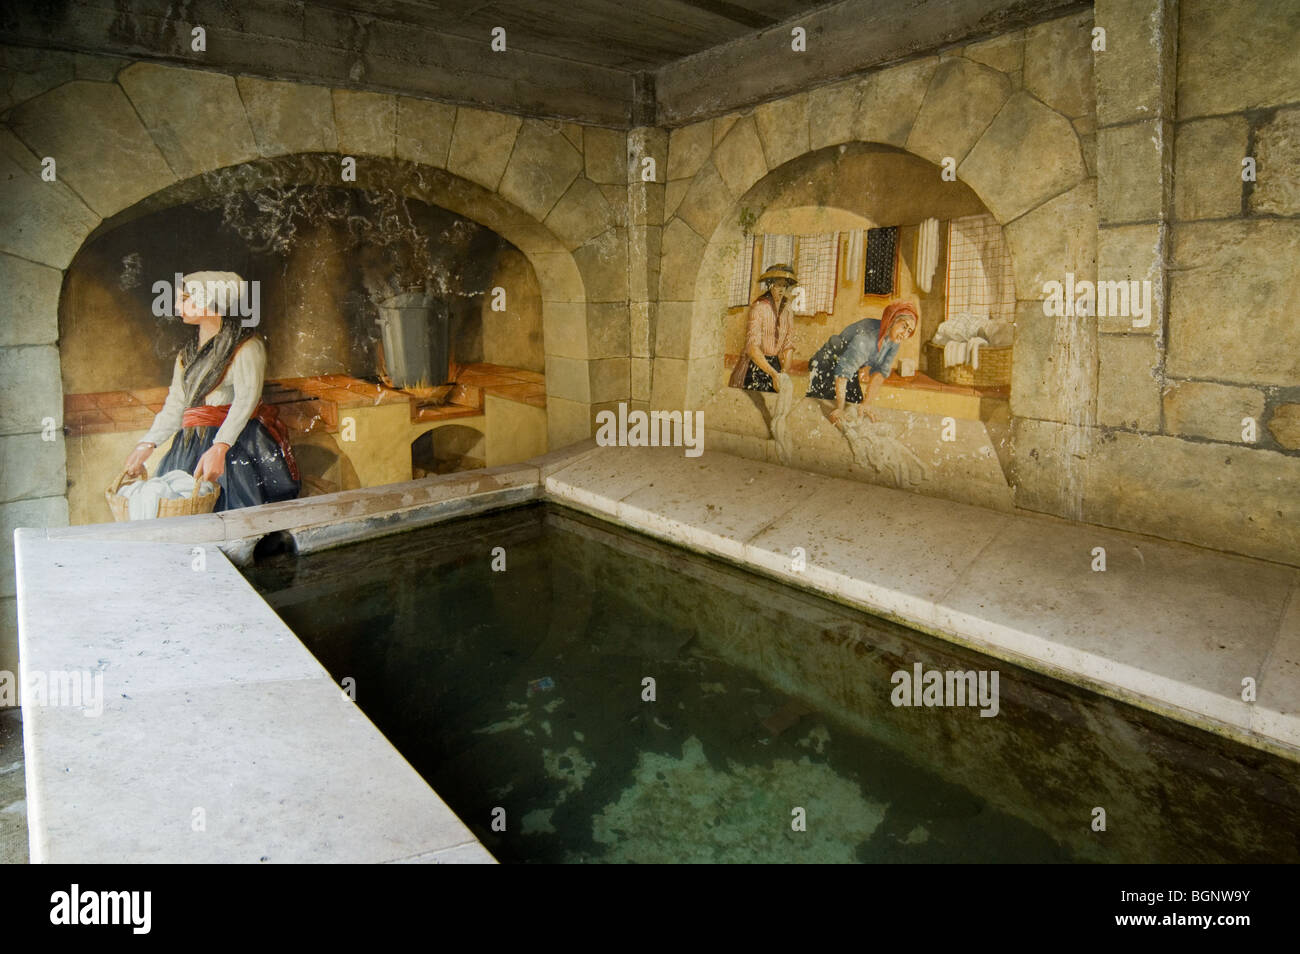 Mural showing washwomen washing in covered public lavoir at Aiguines, Provence-Alpes-Côte d'Azur, Var, Provence, France Stock Photo